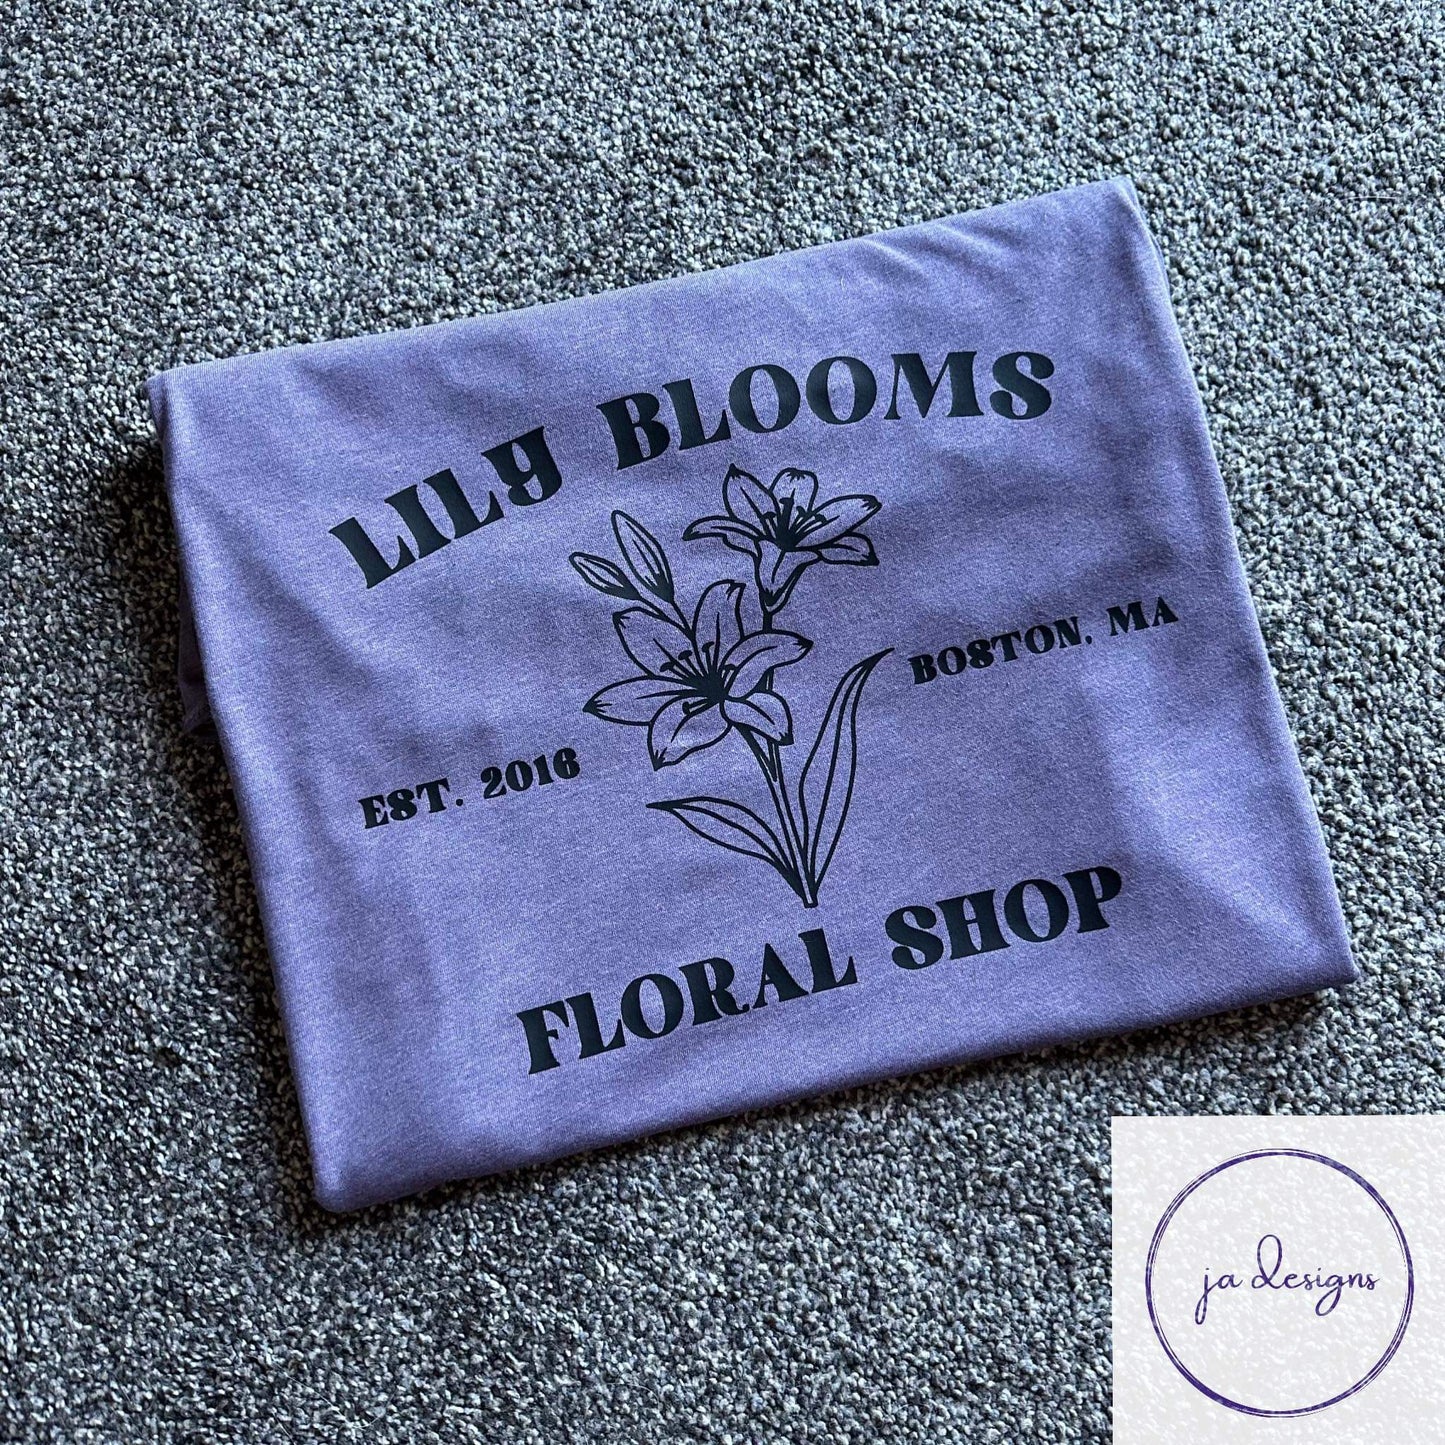 Lily Blooms T-shirt